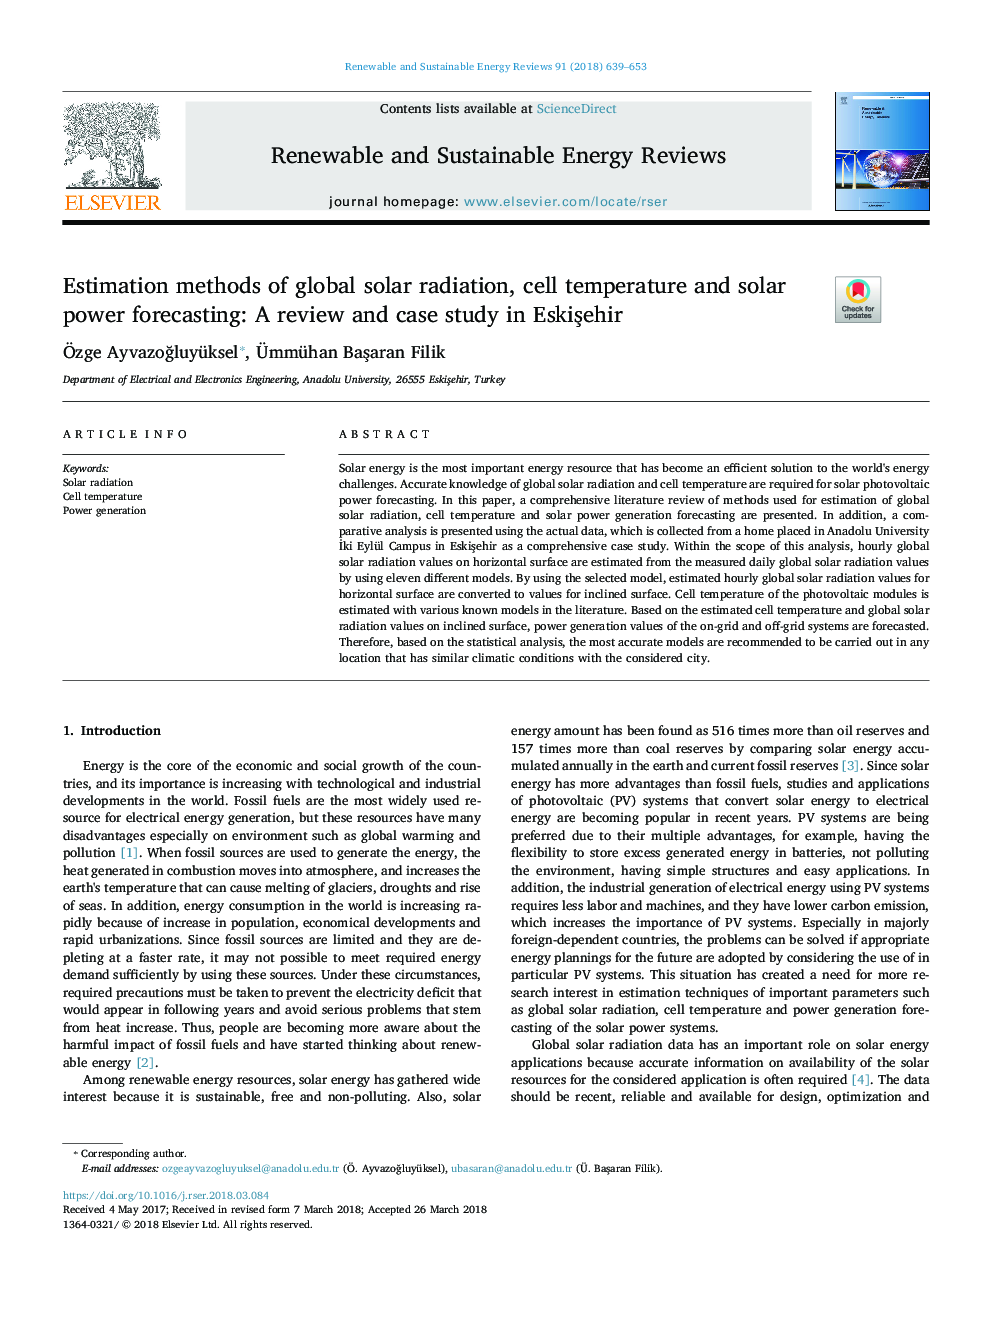 Estimation methods of global solar radiation, cell temperature and solar power forecasting: A review and case study in EskiÅehir